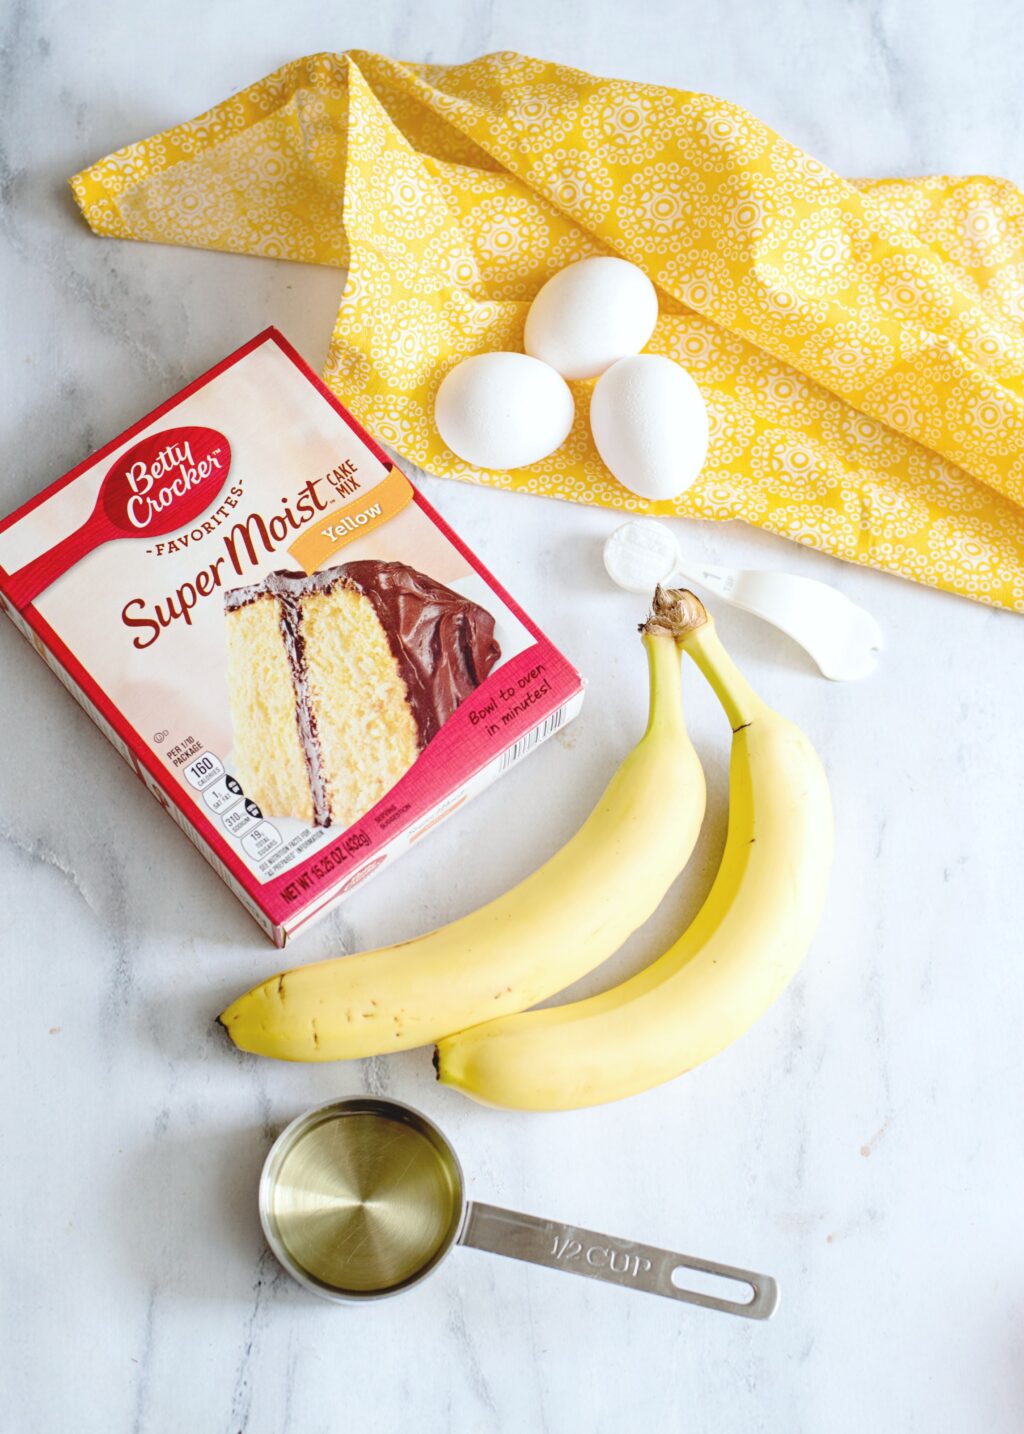 Ingredients to make Banana Bundt cake. Banana, cake mix, eggs, and oil are shown. 